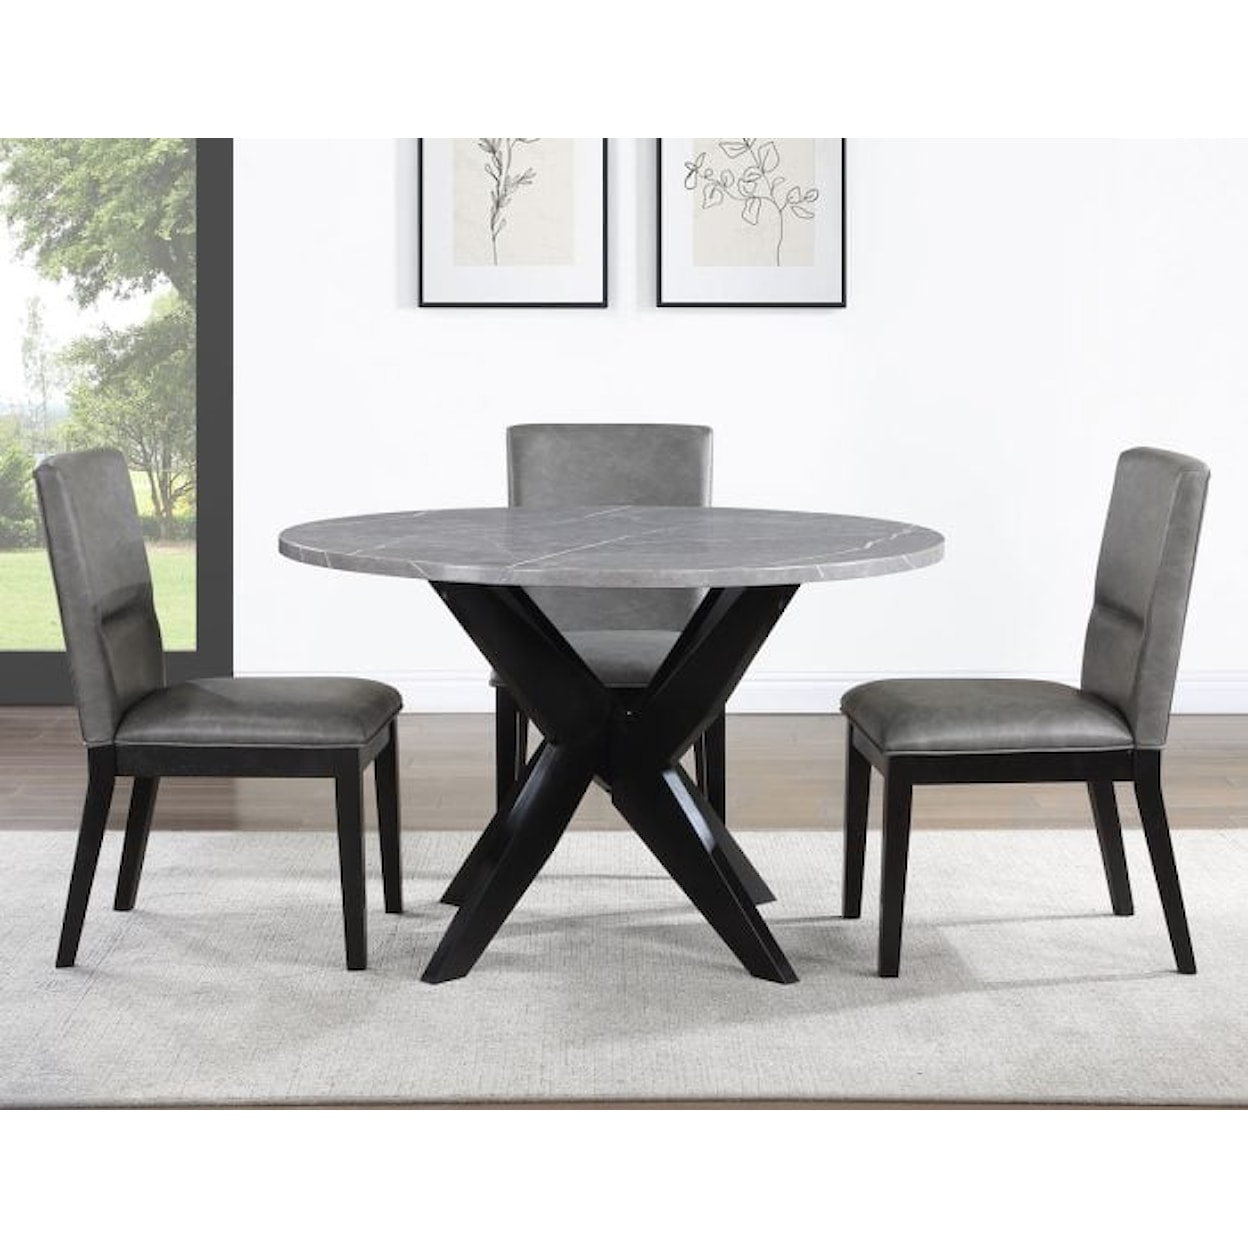 Steve Silver Amy Dining Table